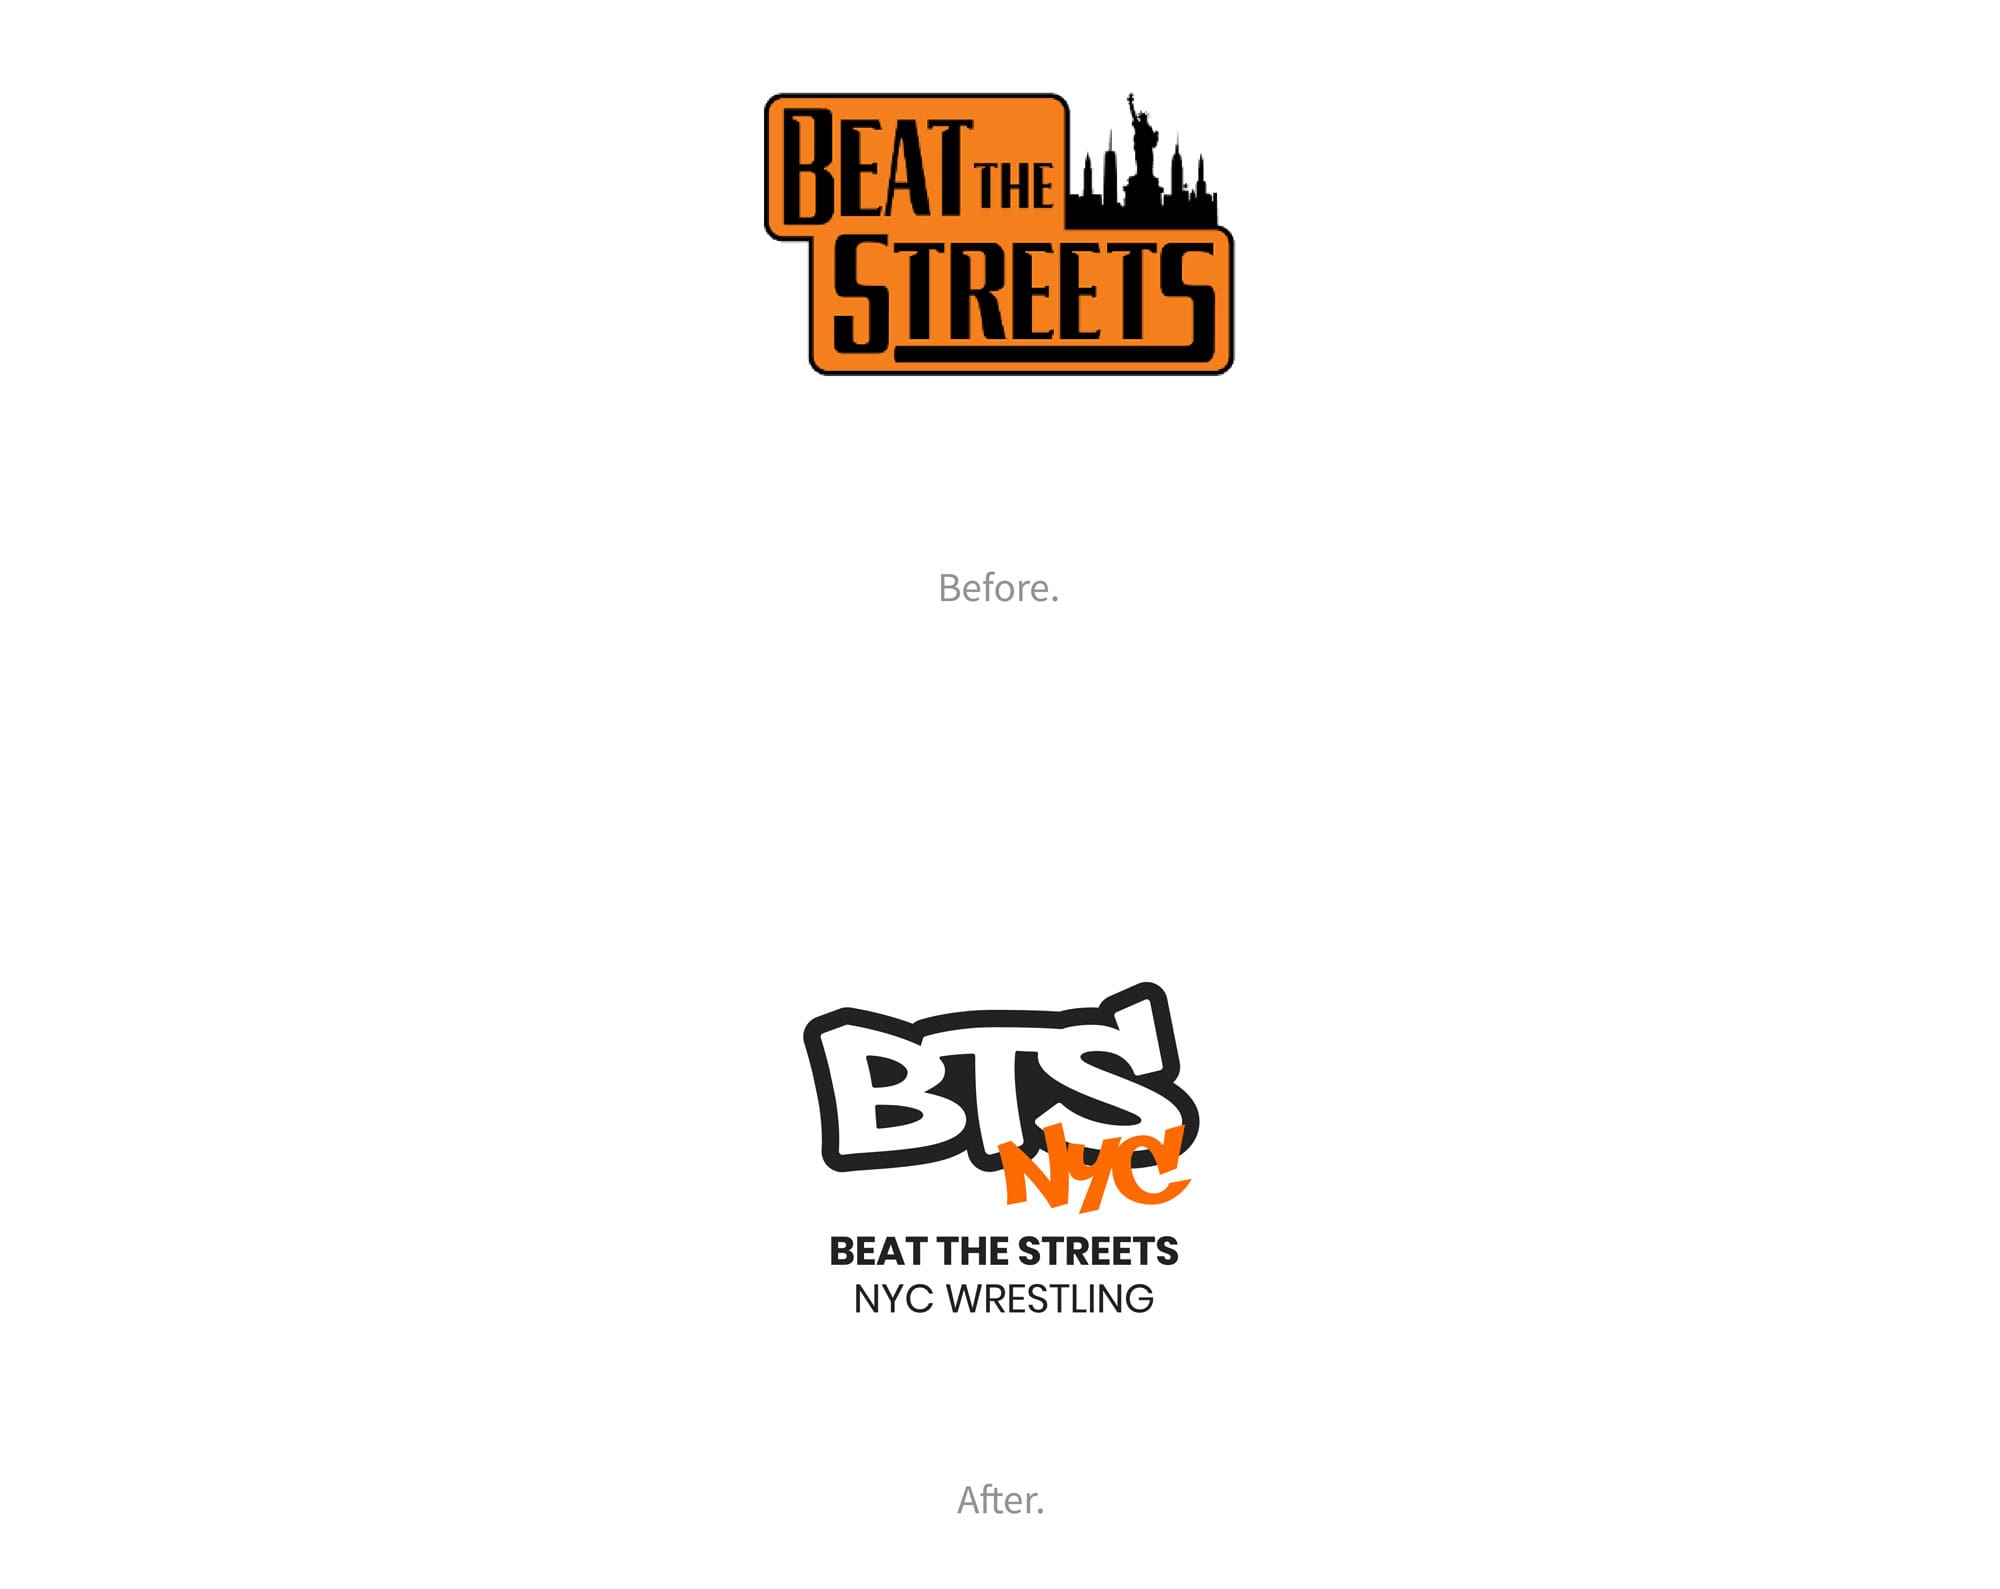 Beat the Streets before and after logos